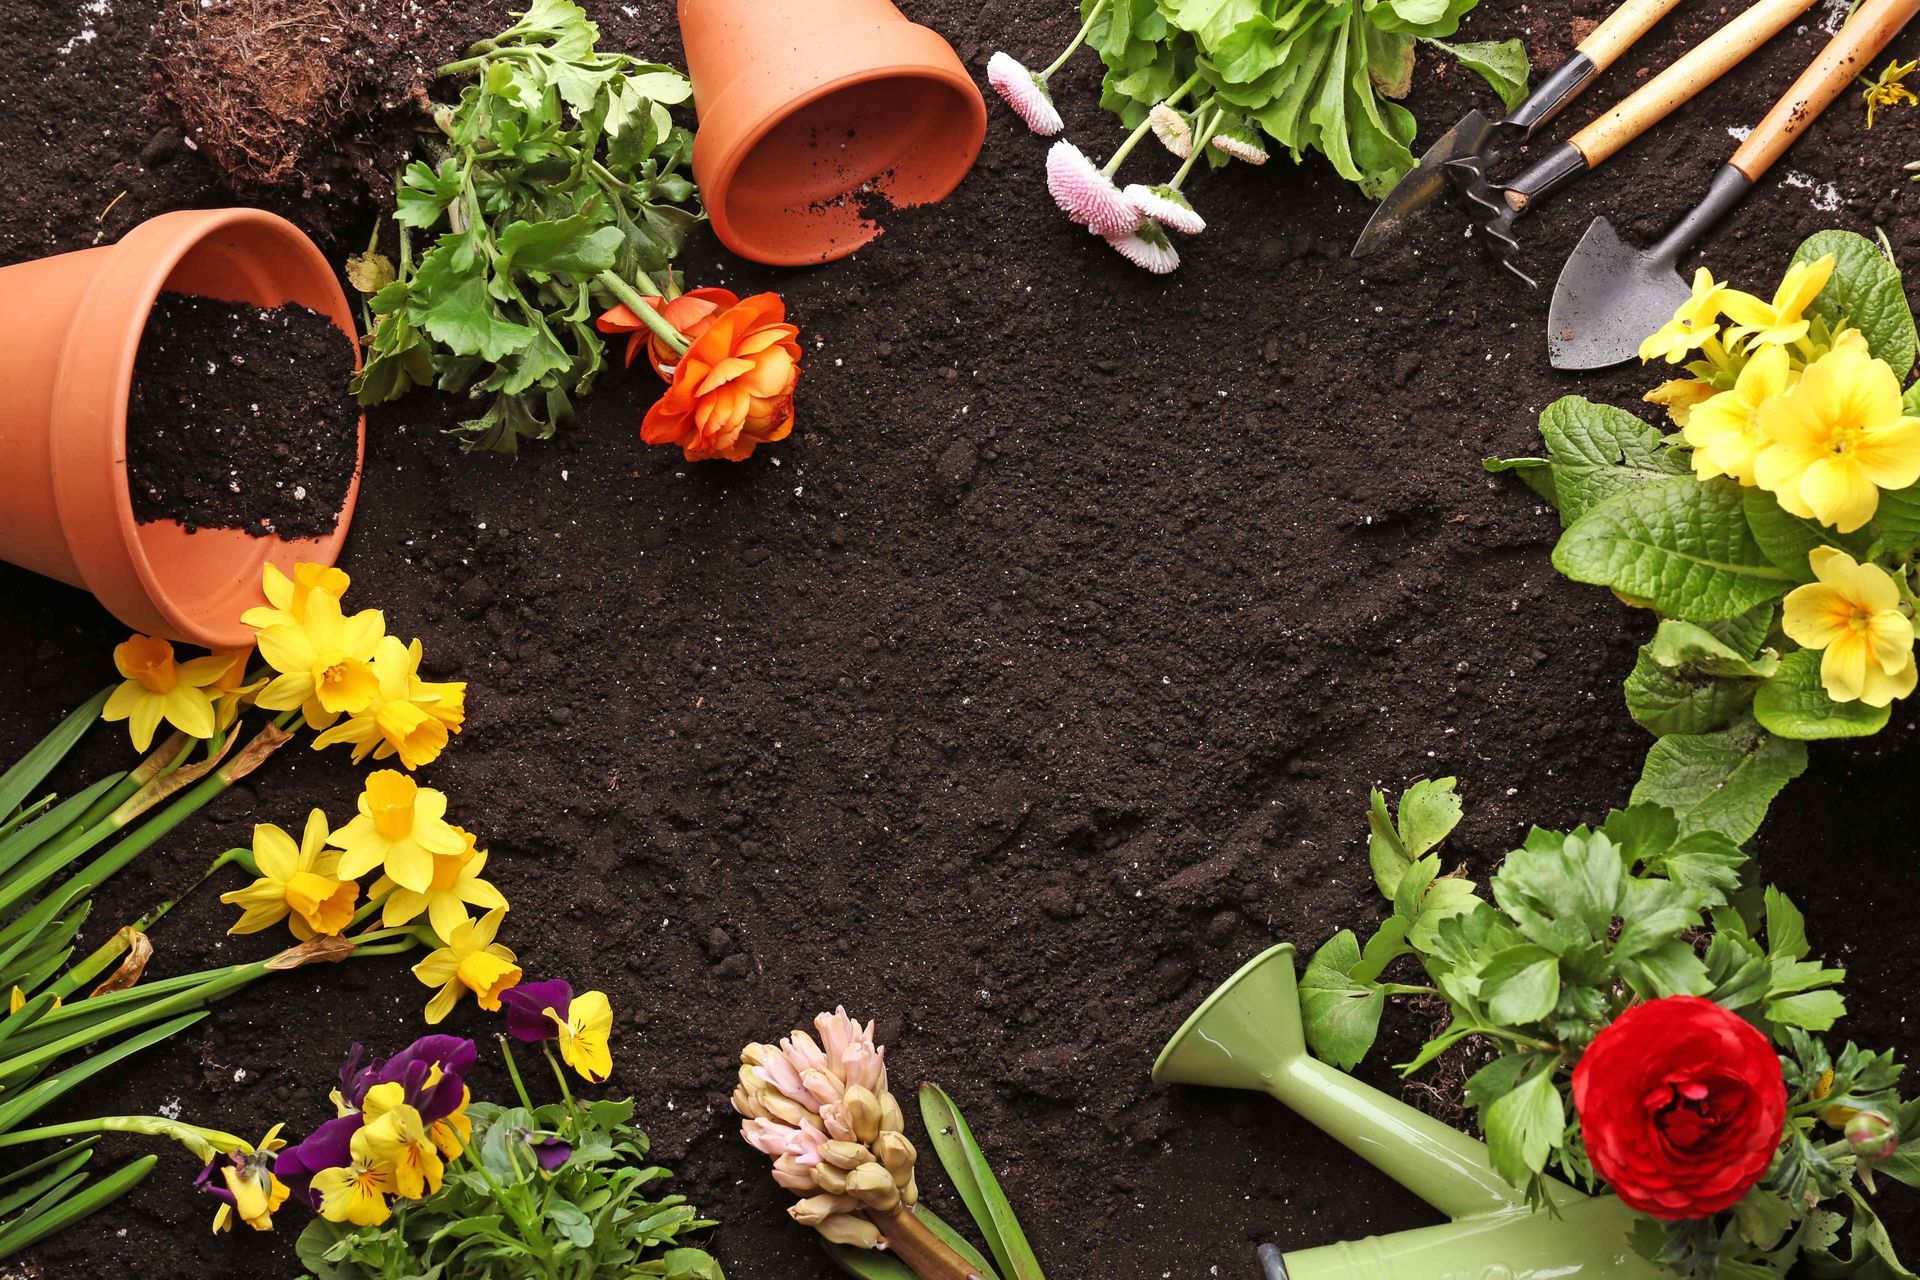 Gardening tools and flowers laid out in a circle on dirt